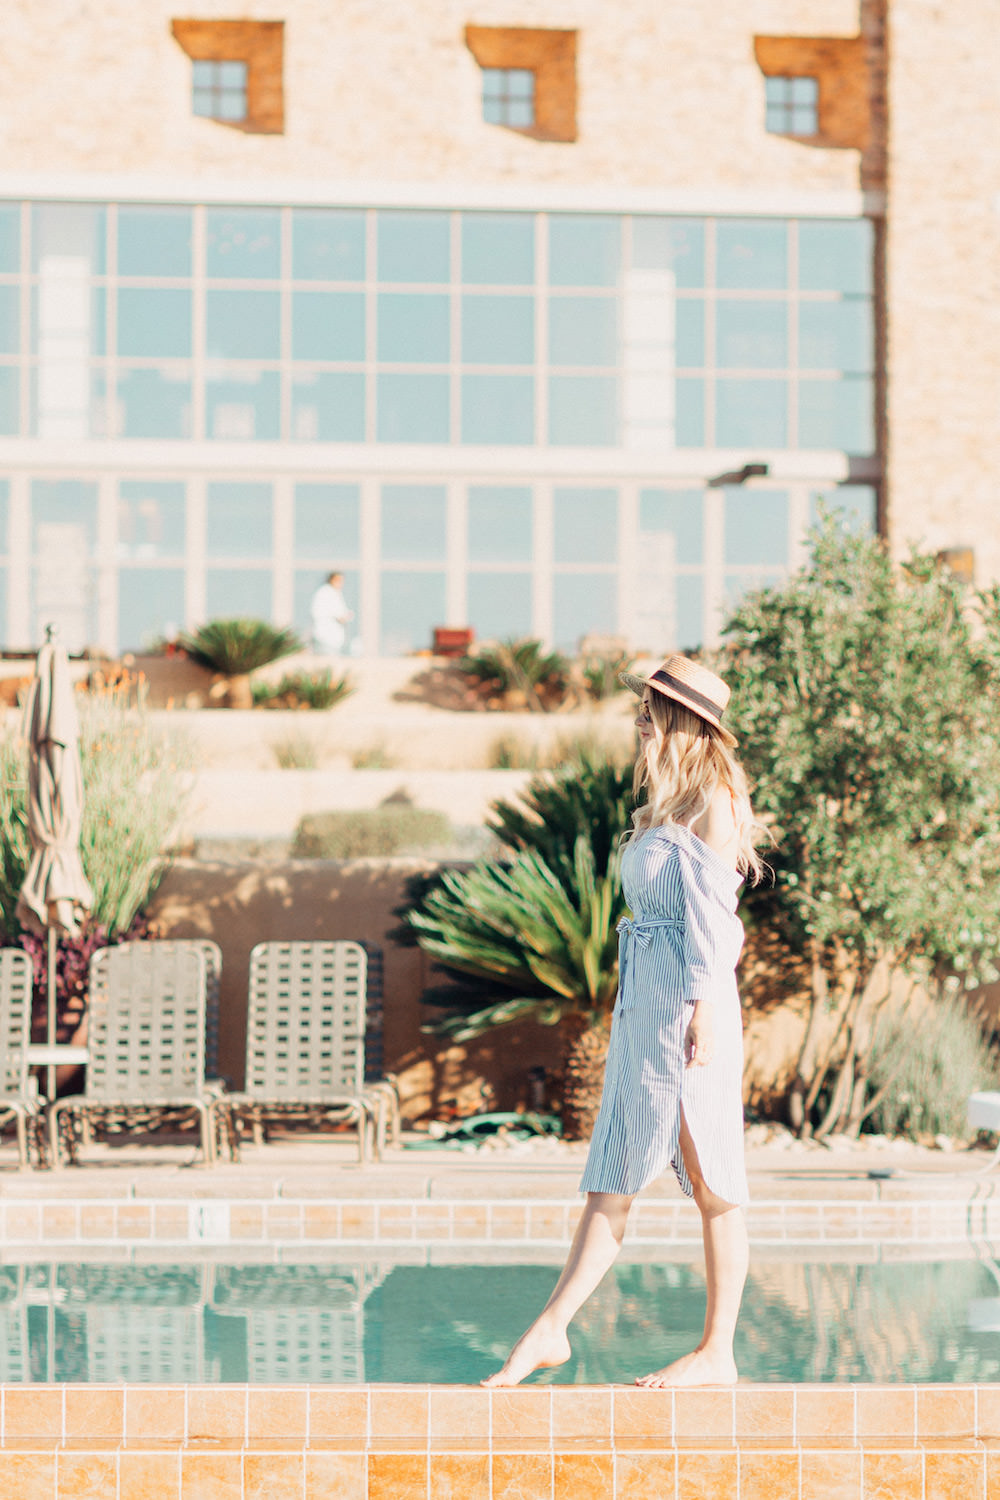 Caitlin Lindquist of the travel blog Dash of Darling shares her weekend getaway to the JW Marriott Tucson Starr Pass Resort